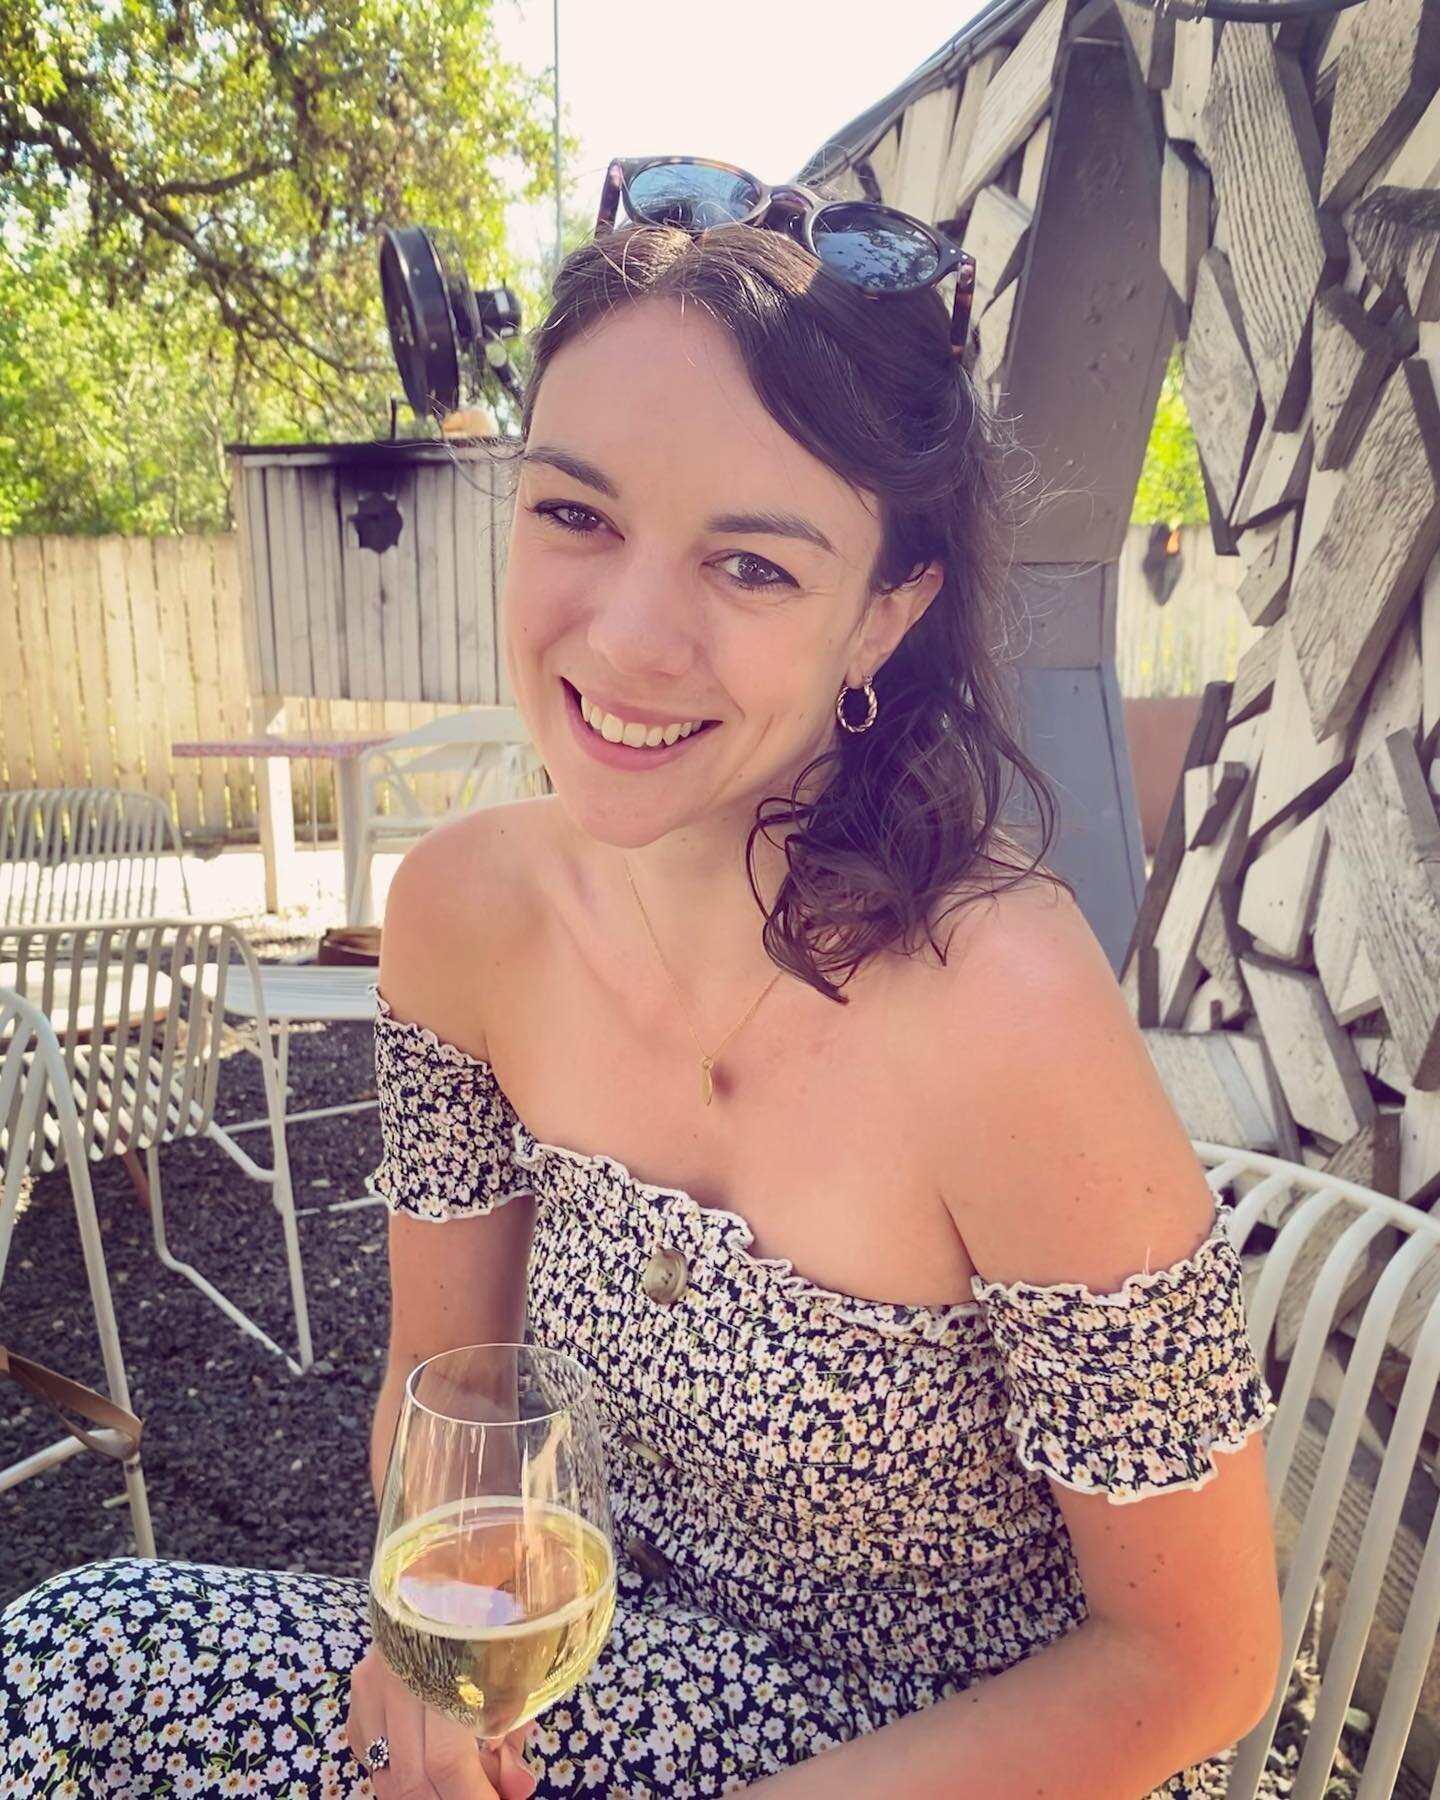 Belated Austin vibes. Sunshine pour quelques belles journ&eacute;es de CP with added blue-corn pecan hush puppies (seriously, a revelation) and best of all the best company. Eye bags courtesy of European working hours.